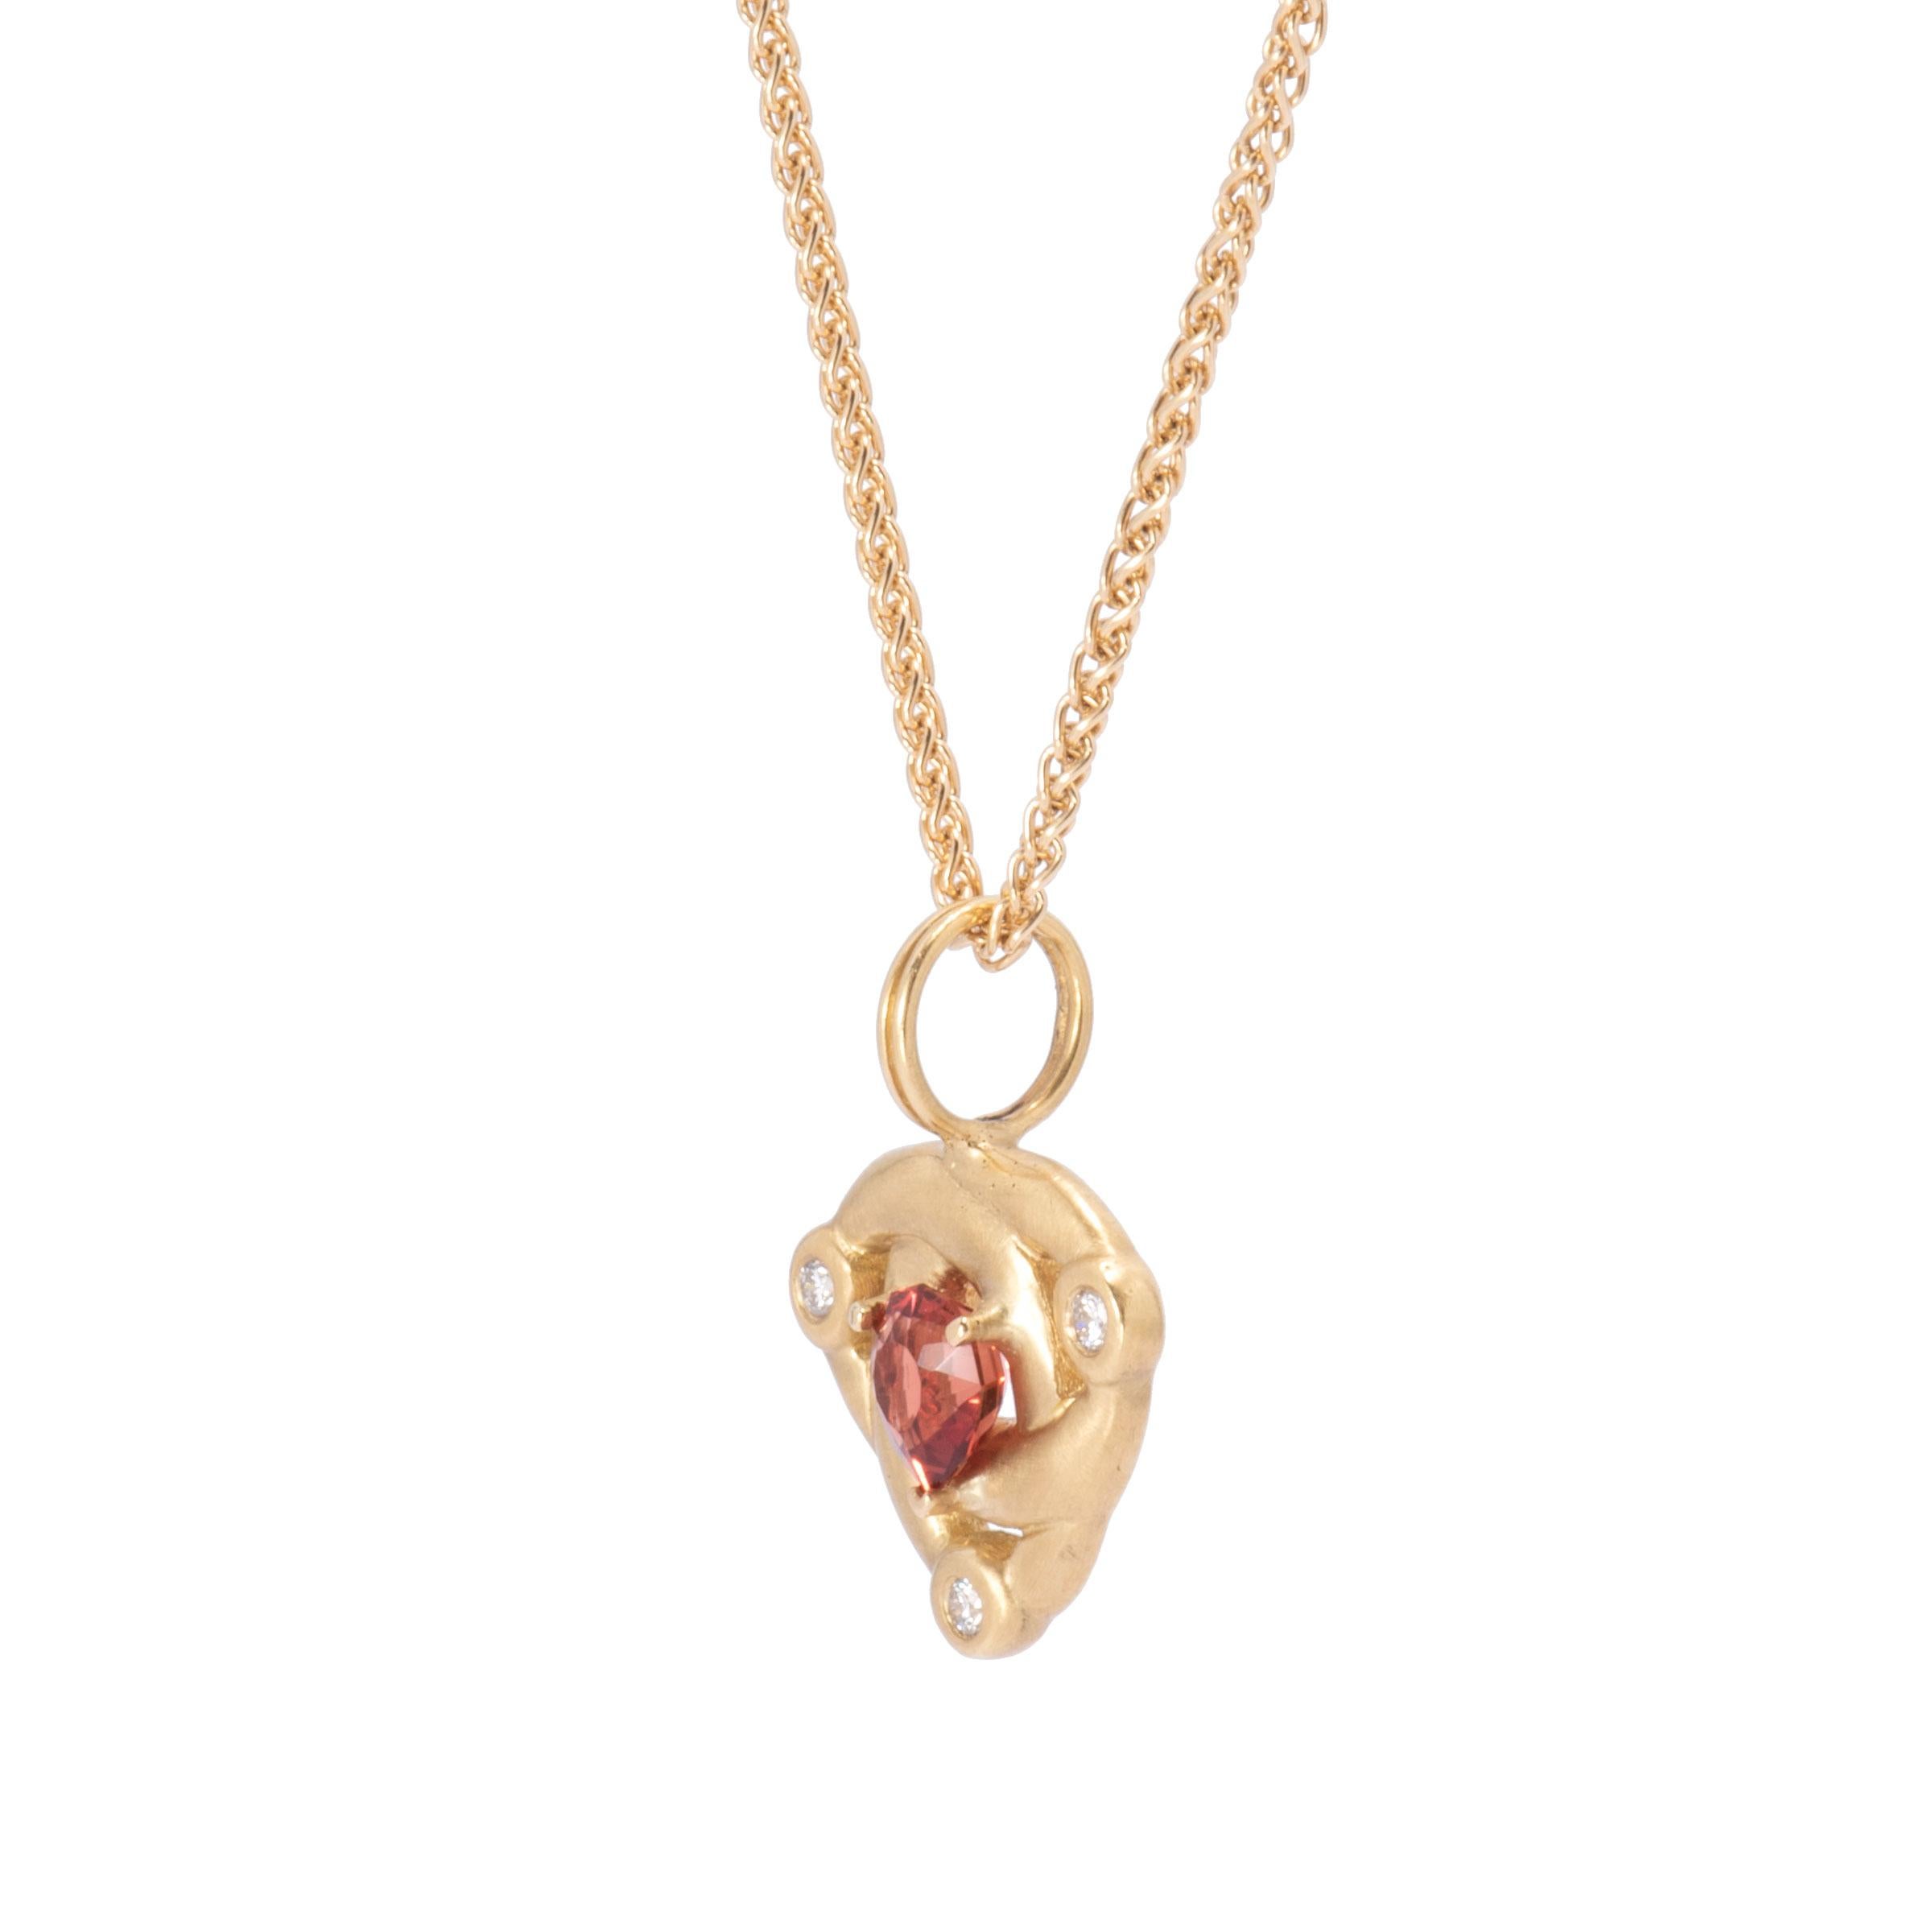 A glorious deep Sunstone weighing 1ct. is prong set in the center of this 18 karat gold Celtic Knot Pendant. Three round white diamonds pay court to this fabulously rich cranberry sunstone. The Celtic Knot is formed by 3 interwoven loops that have